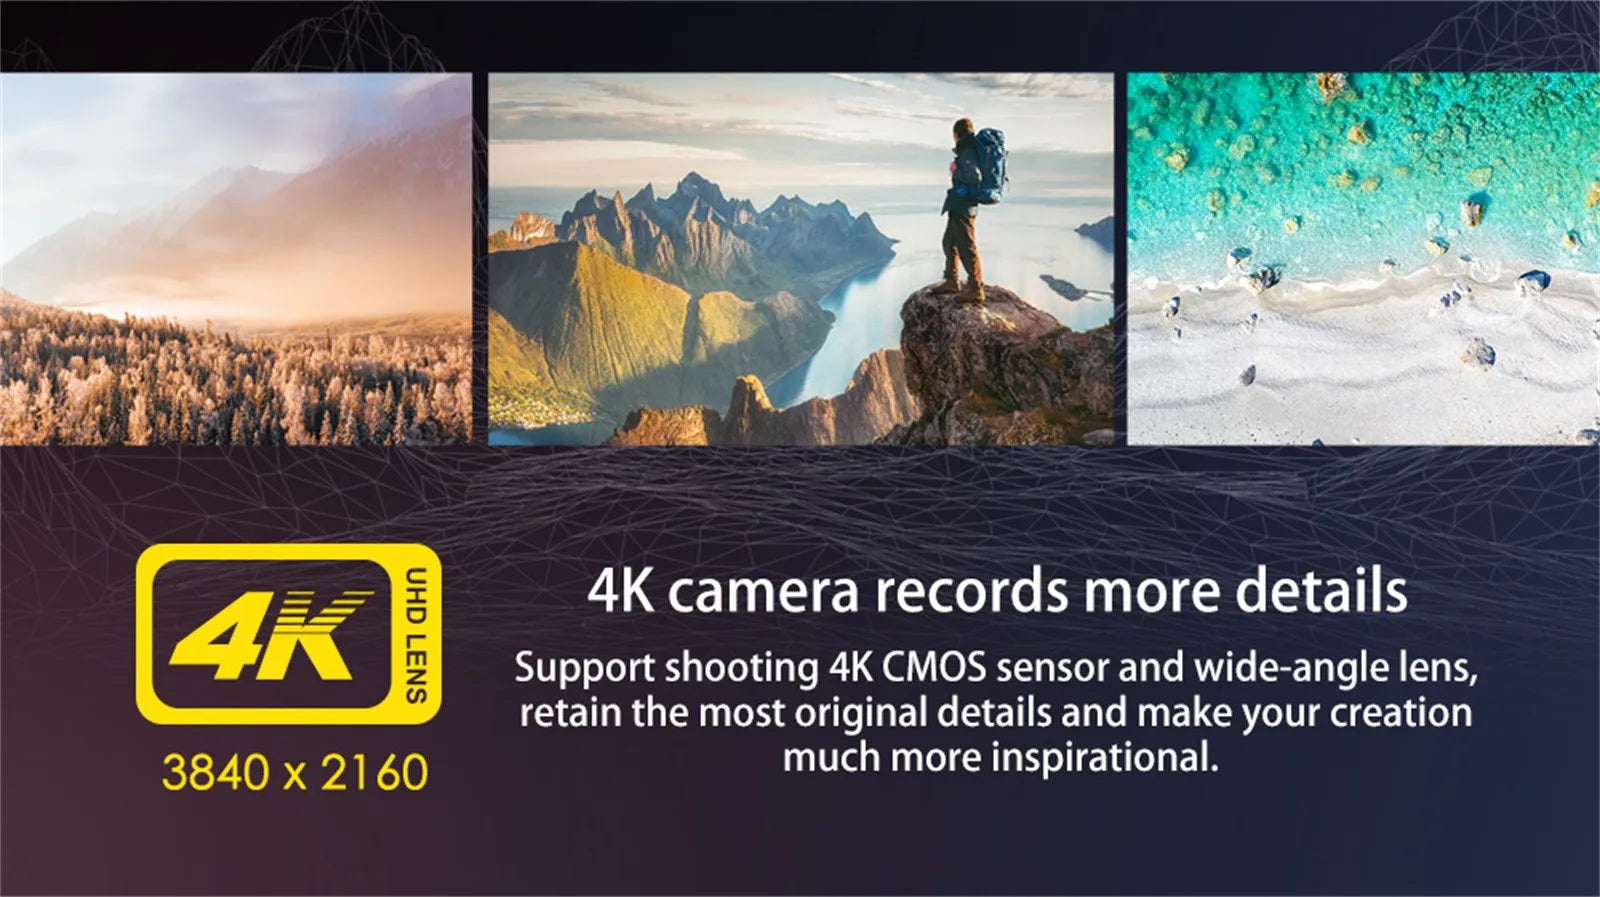 Mjx Bugs 20 Drone, 4K camera records more details ARJ Support shooting 4K CMOS sensor and wide-